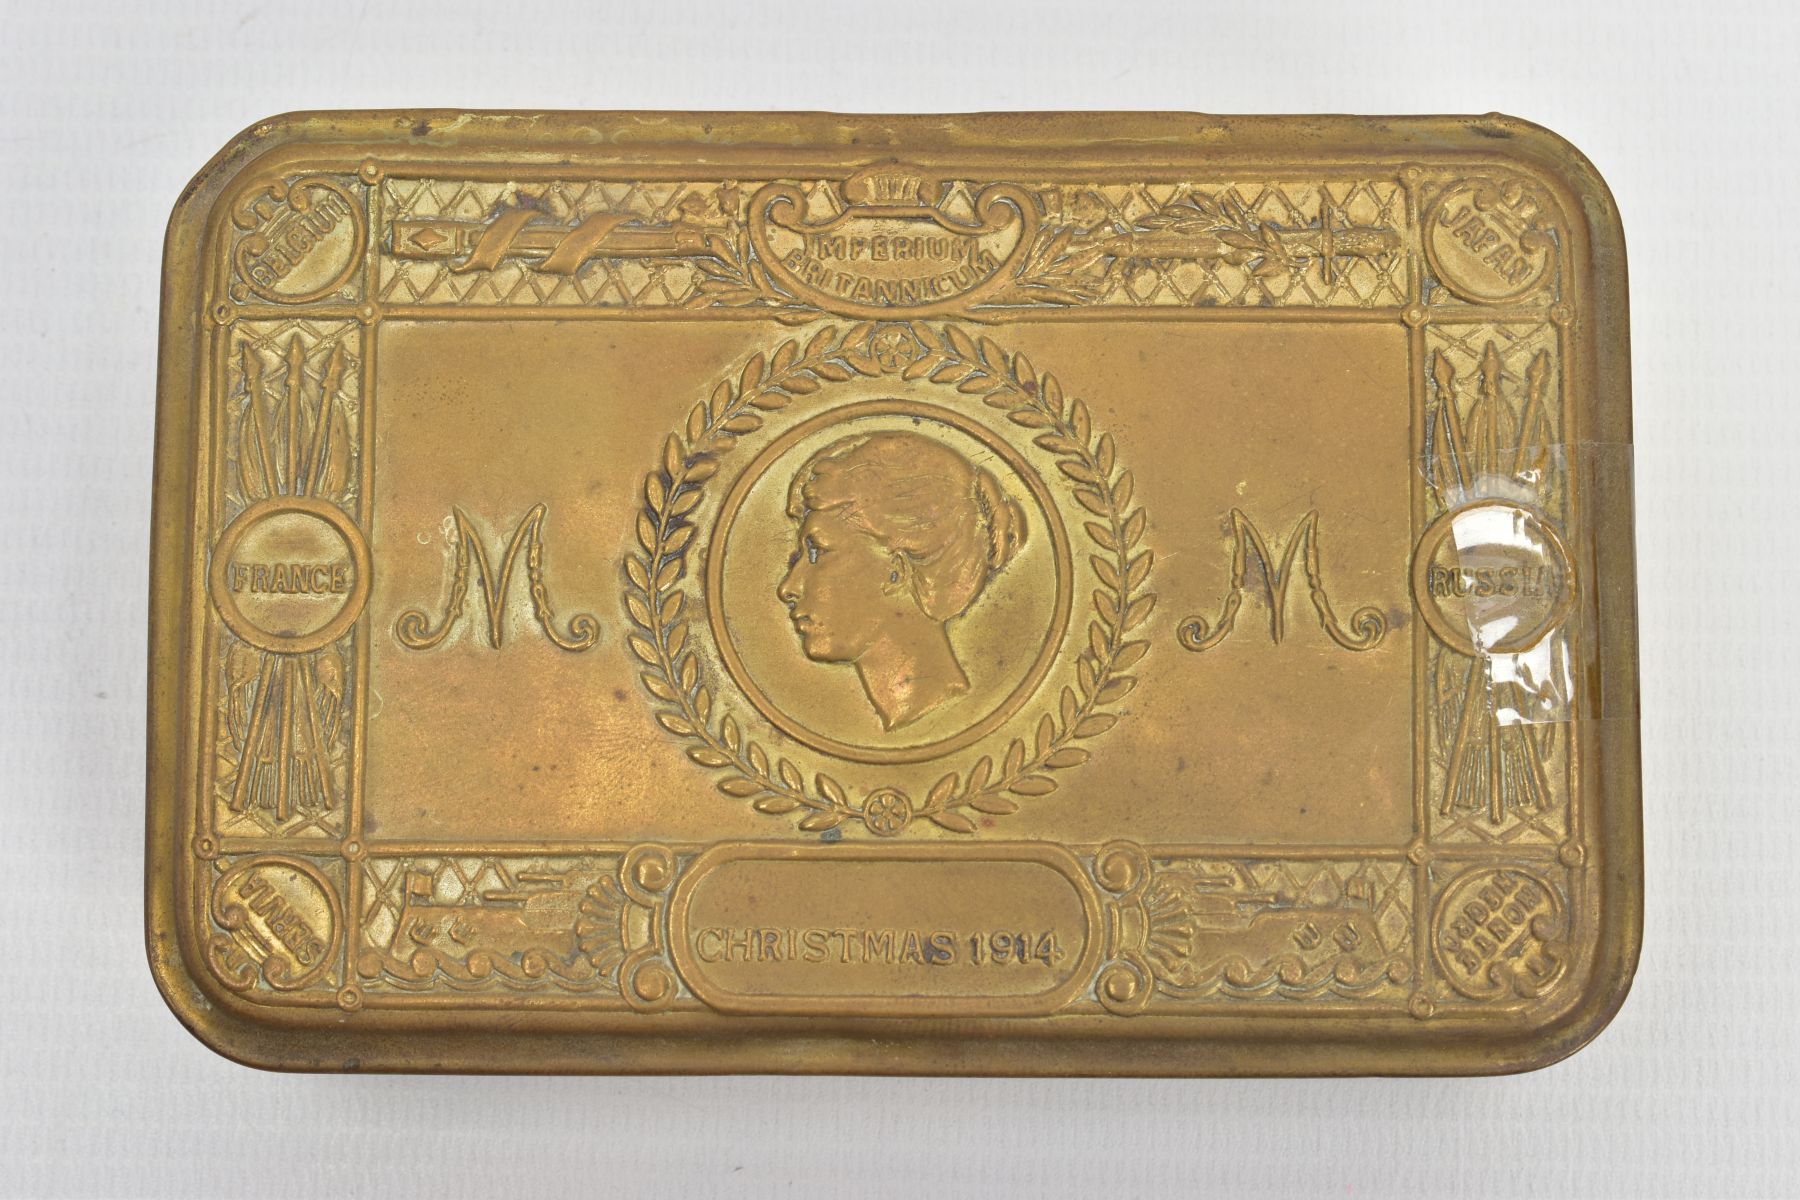 A WORLD WAR ONE PRINCESS MARY TIN, no contents, but in good overall condition, lid closes nicely - Image 7 of 7